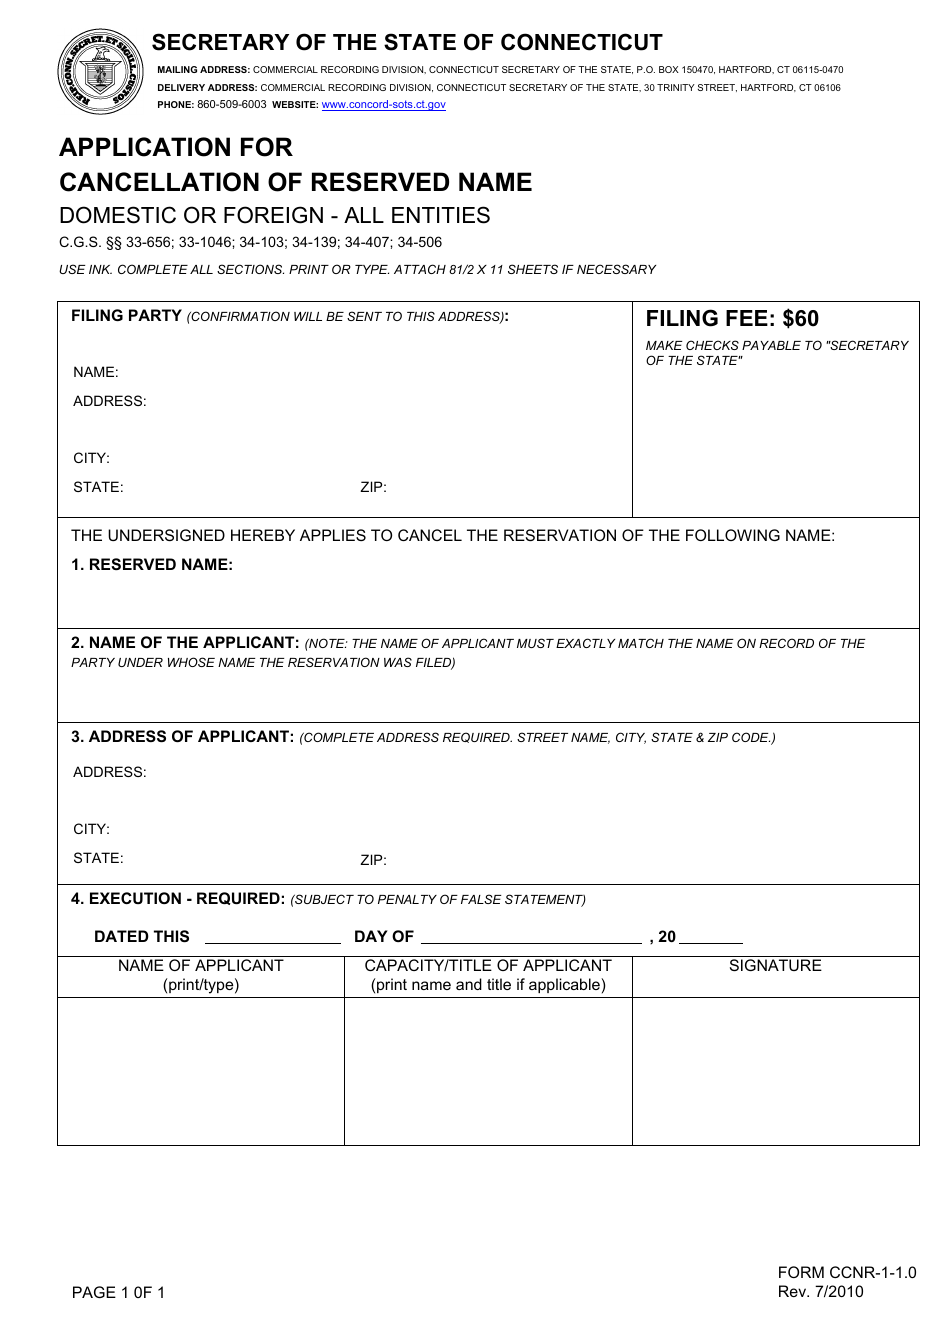 Form CCNR-1-1.0 Application for Cancellation of Reserved Name - Connecticut, Page 1